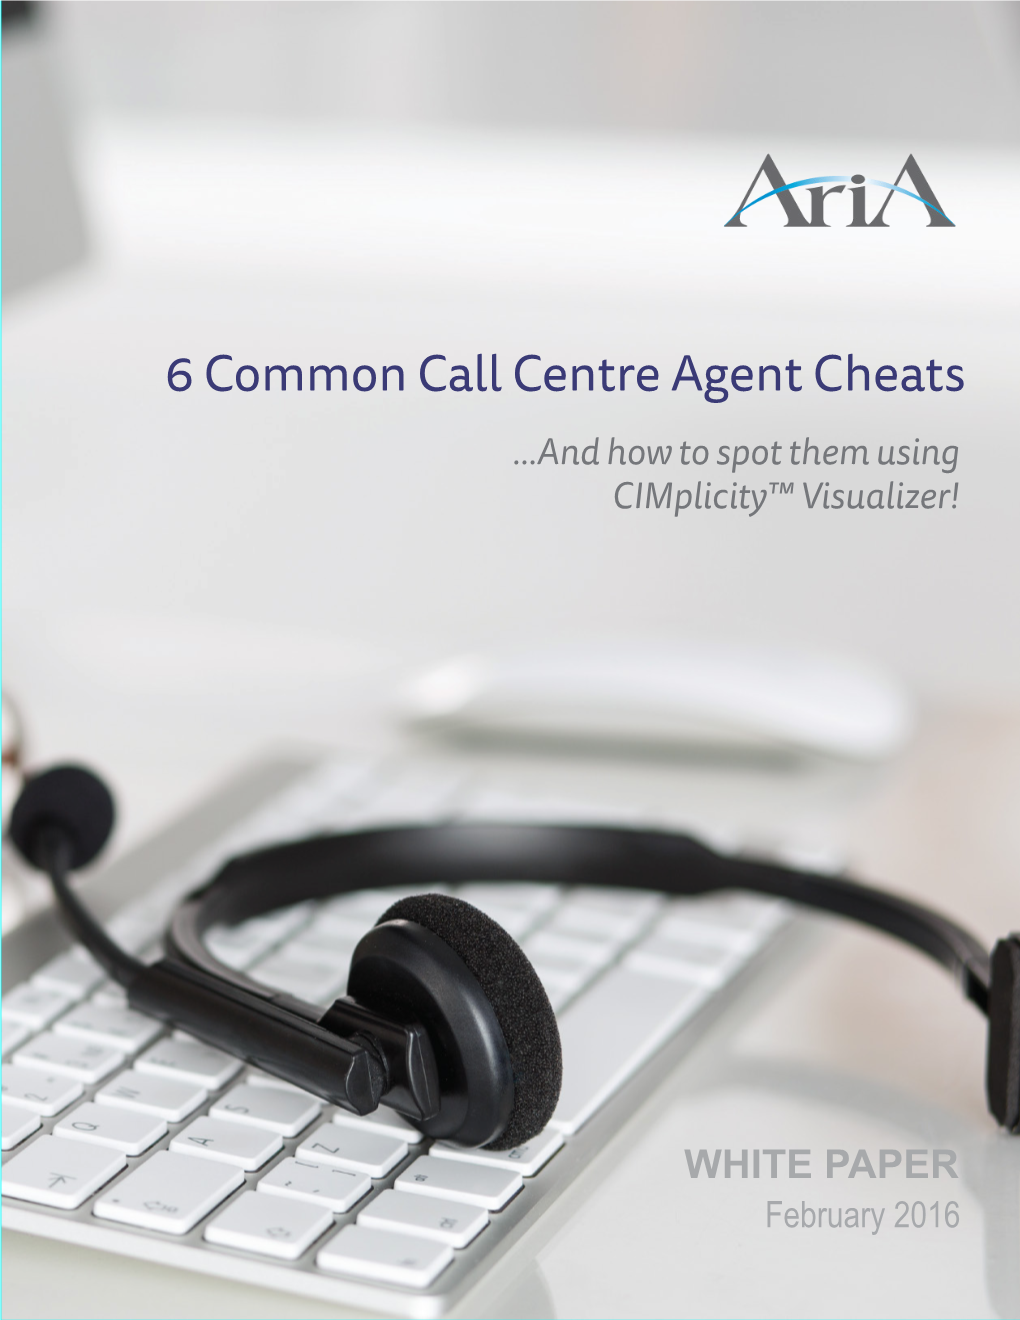 6 Common Call Centre Agent Cheats …And How to Spot Them Using Cimplicity™ Visualizer!